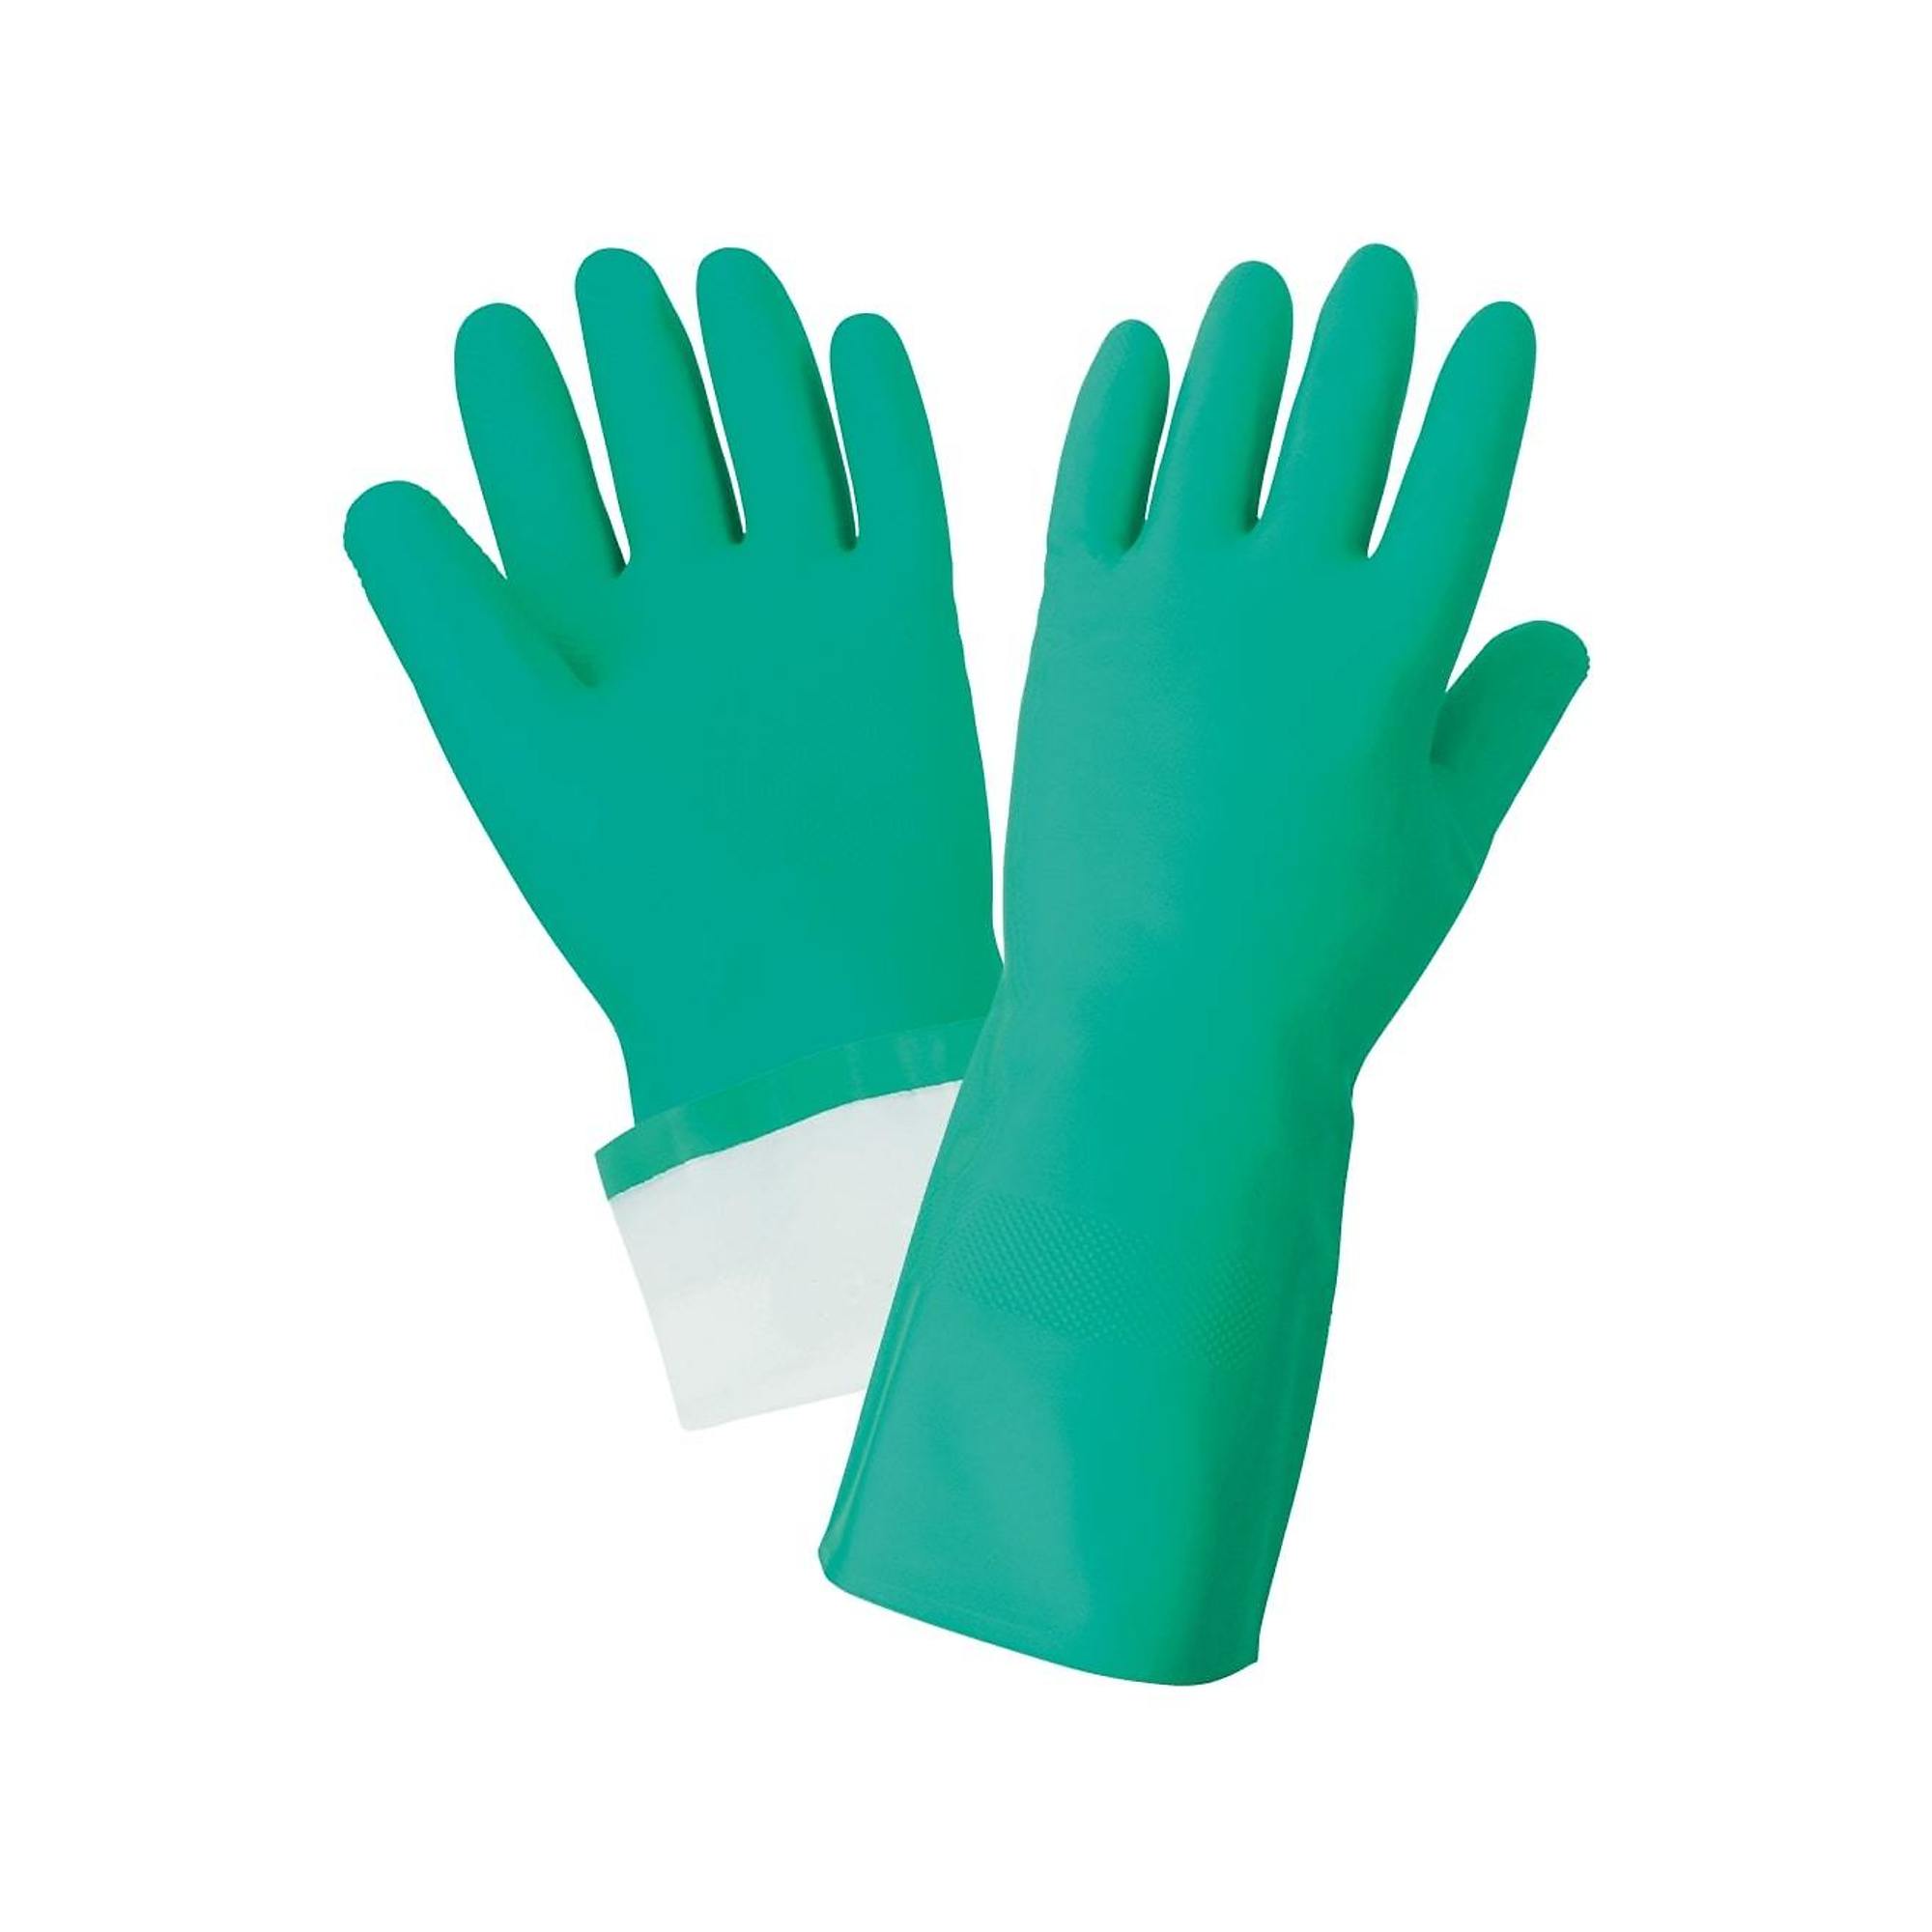 FrogWear, 15-Mil, 13Inch, Flock-Line Nitrile Diamond Grip Gloves-12 Pairs, Size XL, Color Green, Included (qty.) 12 Model 515F-10(XL)